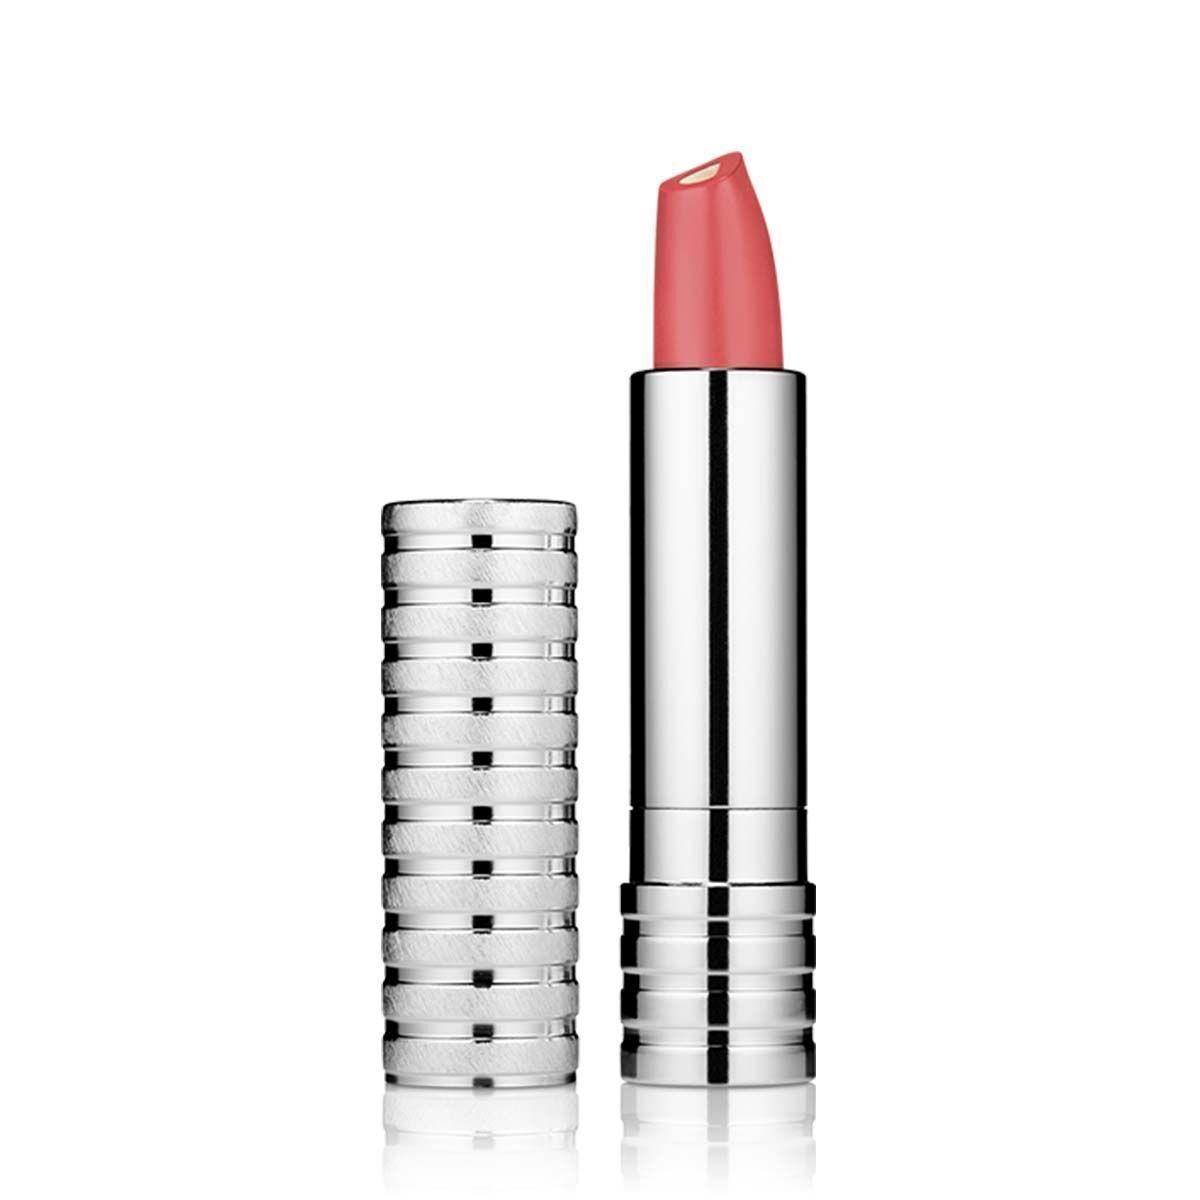 Clinique Dramatically Different Lipstick Shade 17 Strawberry Ice 4g